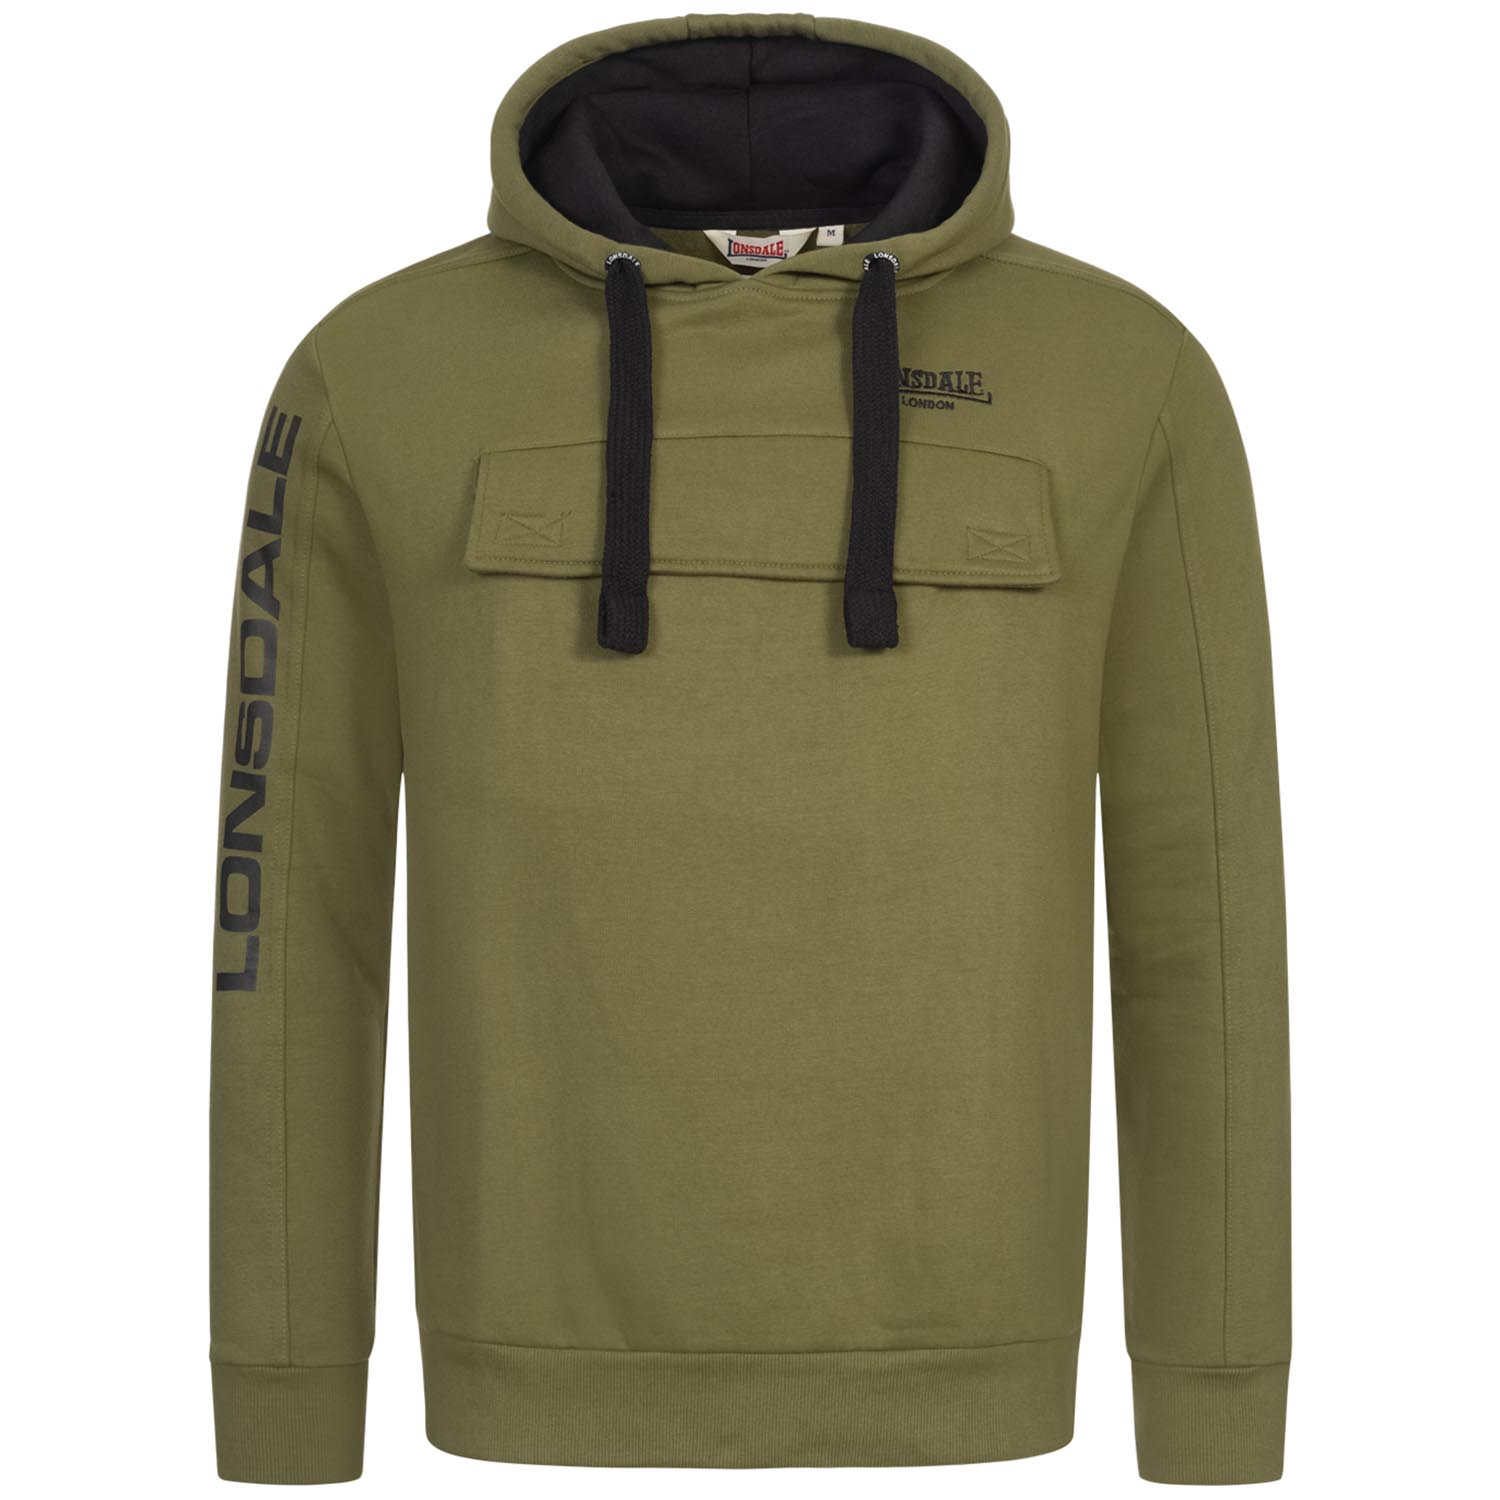 Lonsdale Hoody, Rushen, olive